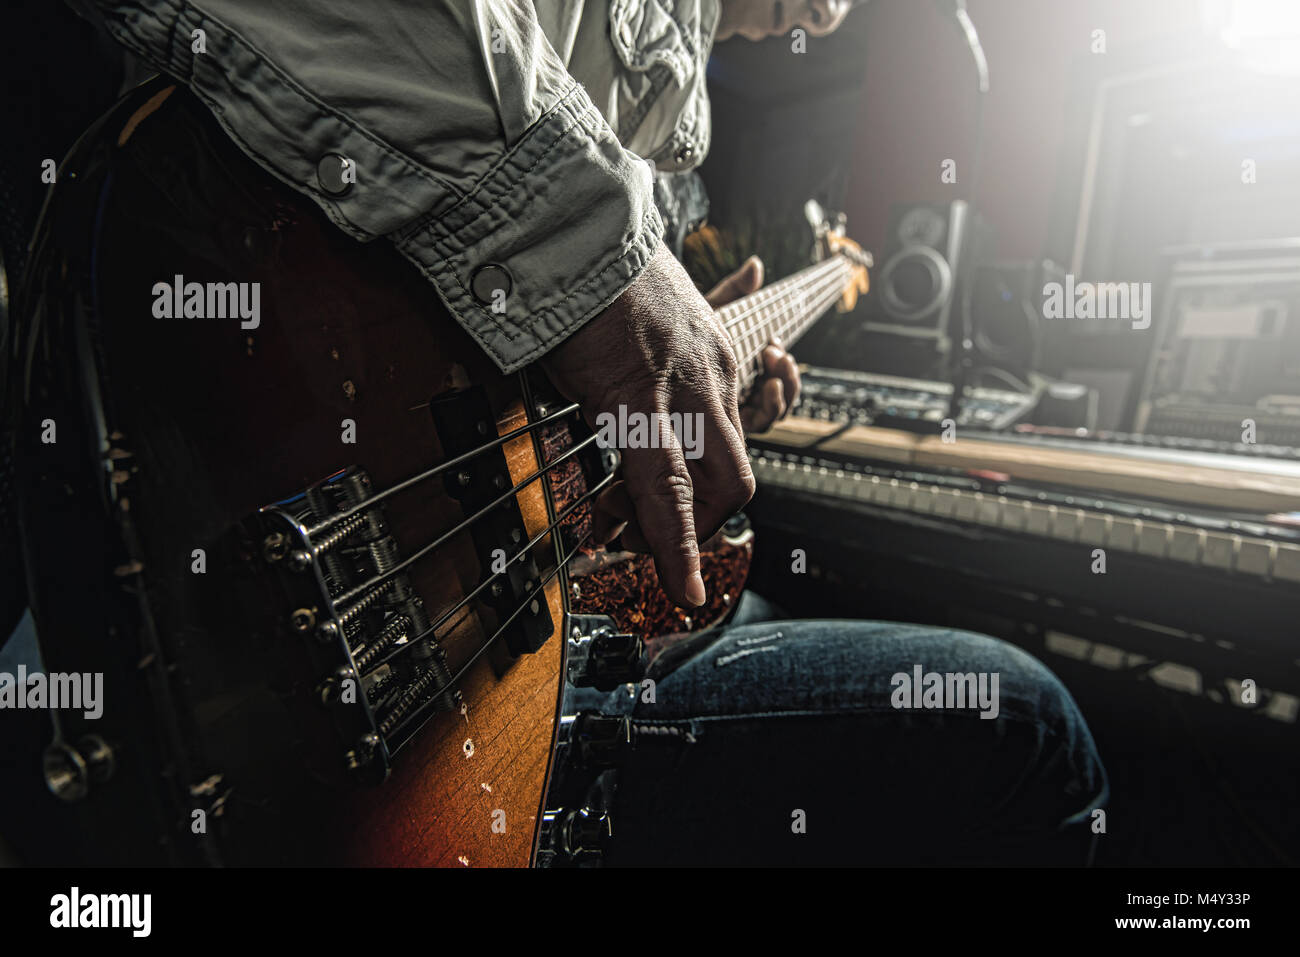 Musician playing electric guitar Stock Photo